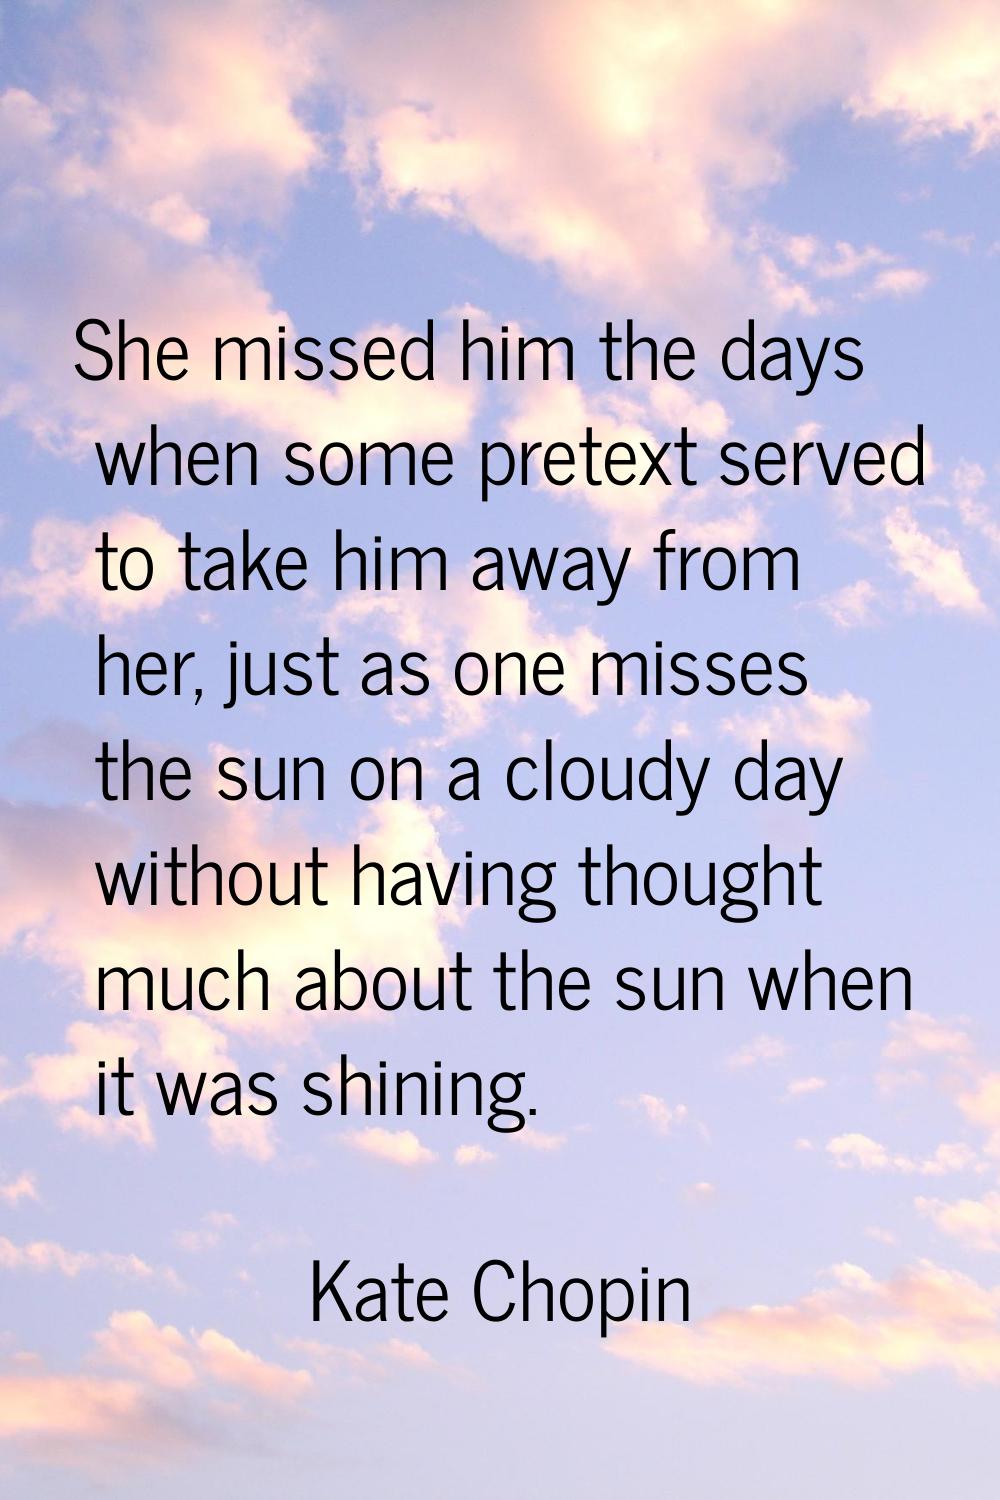 She missed him the days when some pretext served to take him away from her, just as one misses the 